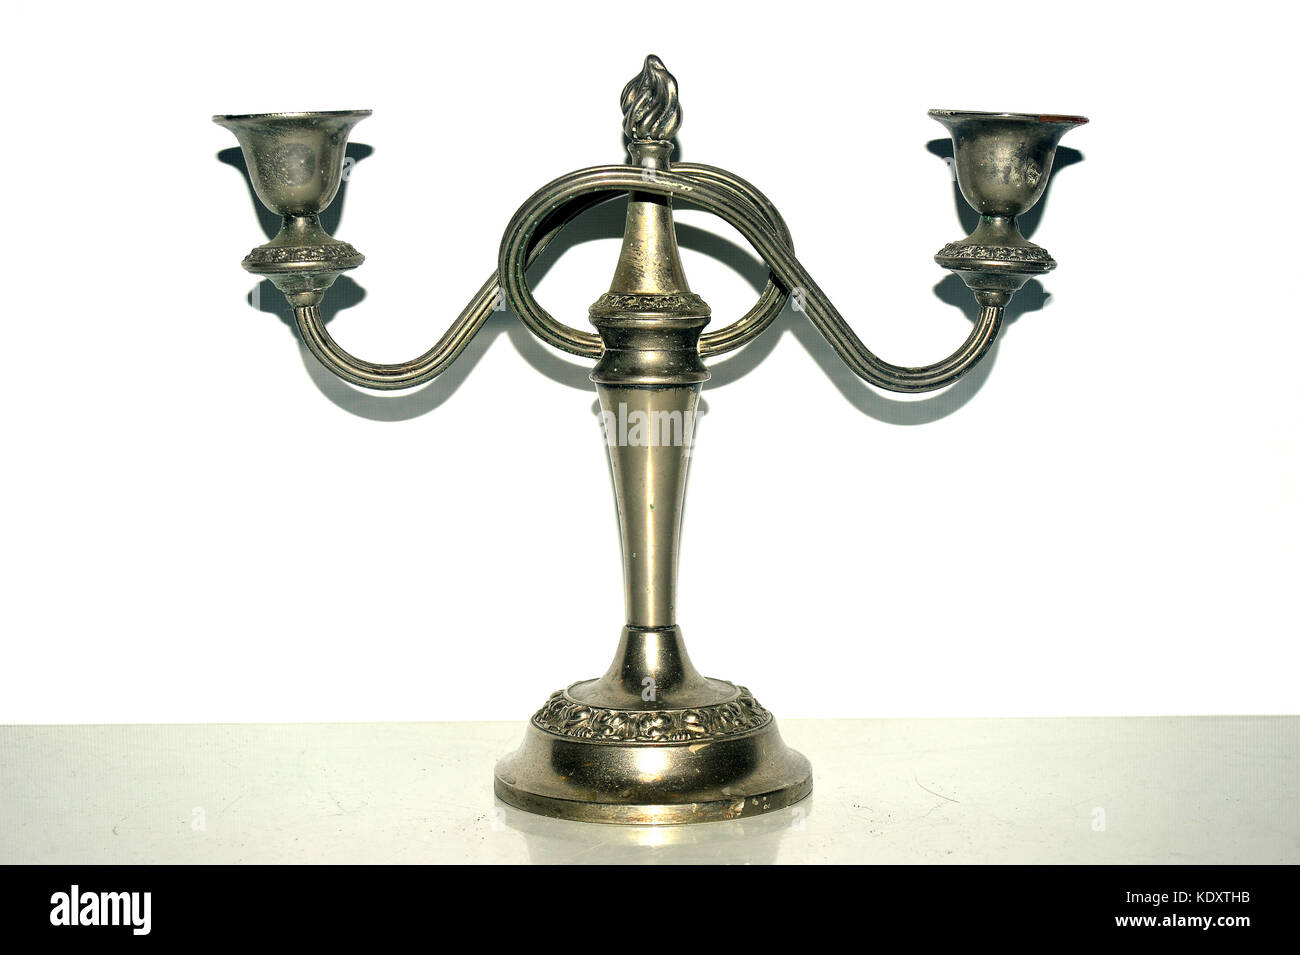 A decoaratice candleholder photographed against a white background Stock Photo